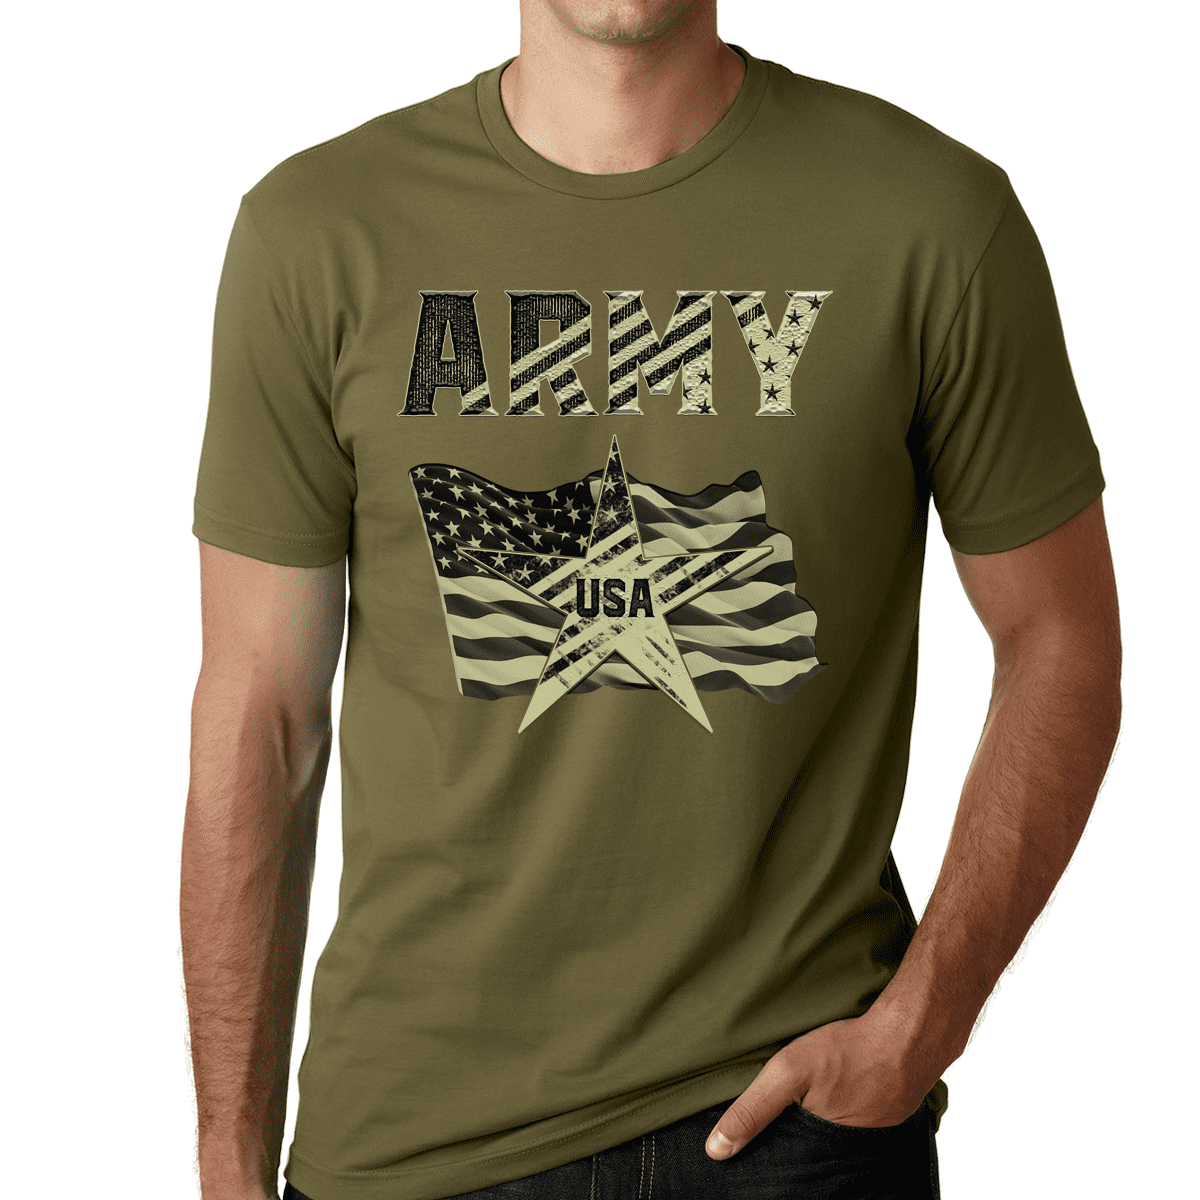 Fire Fit Designs - 4th of July Shirts for Men - Patriotic Shirts for ...